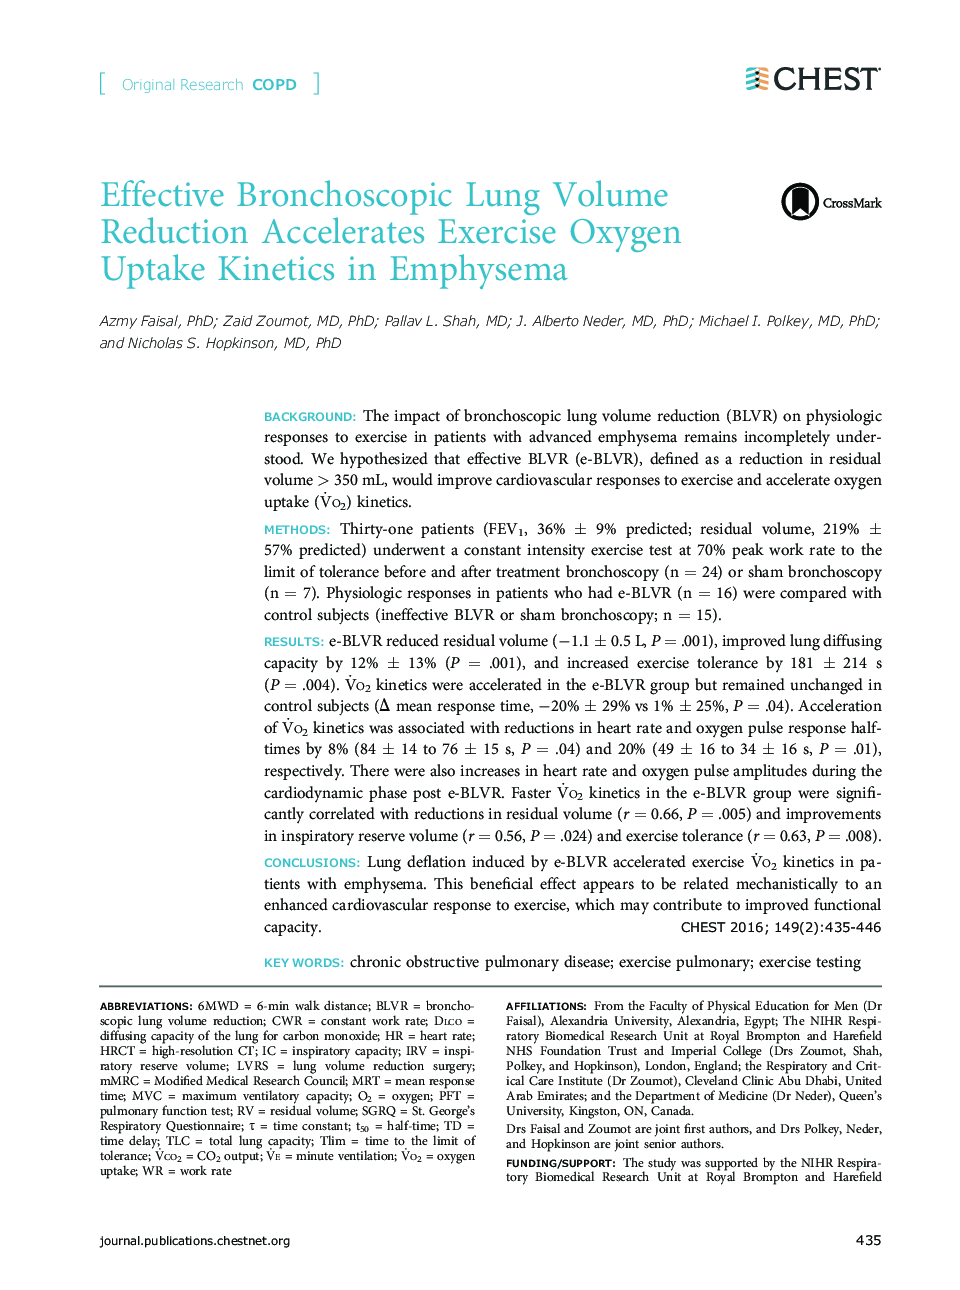 Original Research: COPDEffective Bronchoscopic Lung Volume Reduction Accelerates Exercise Oxygen Uptake Kinetics in Emphysema